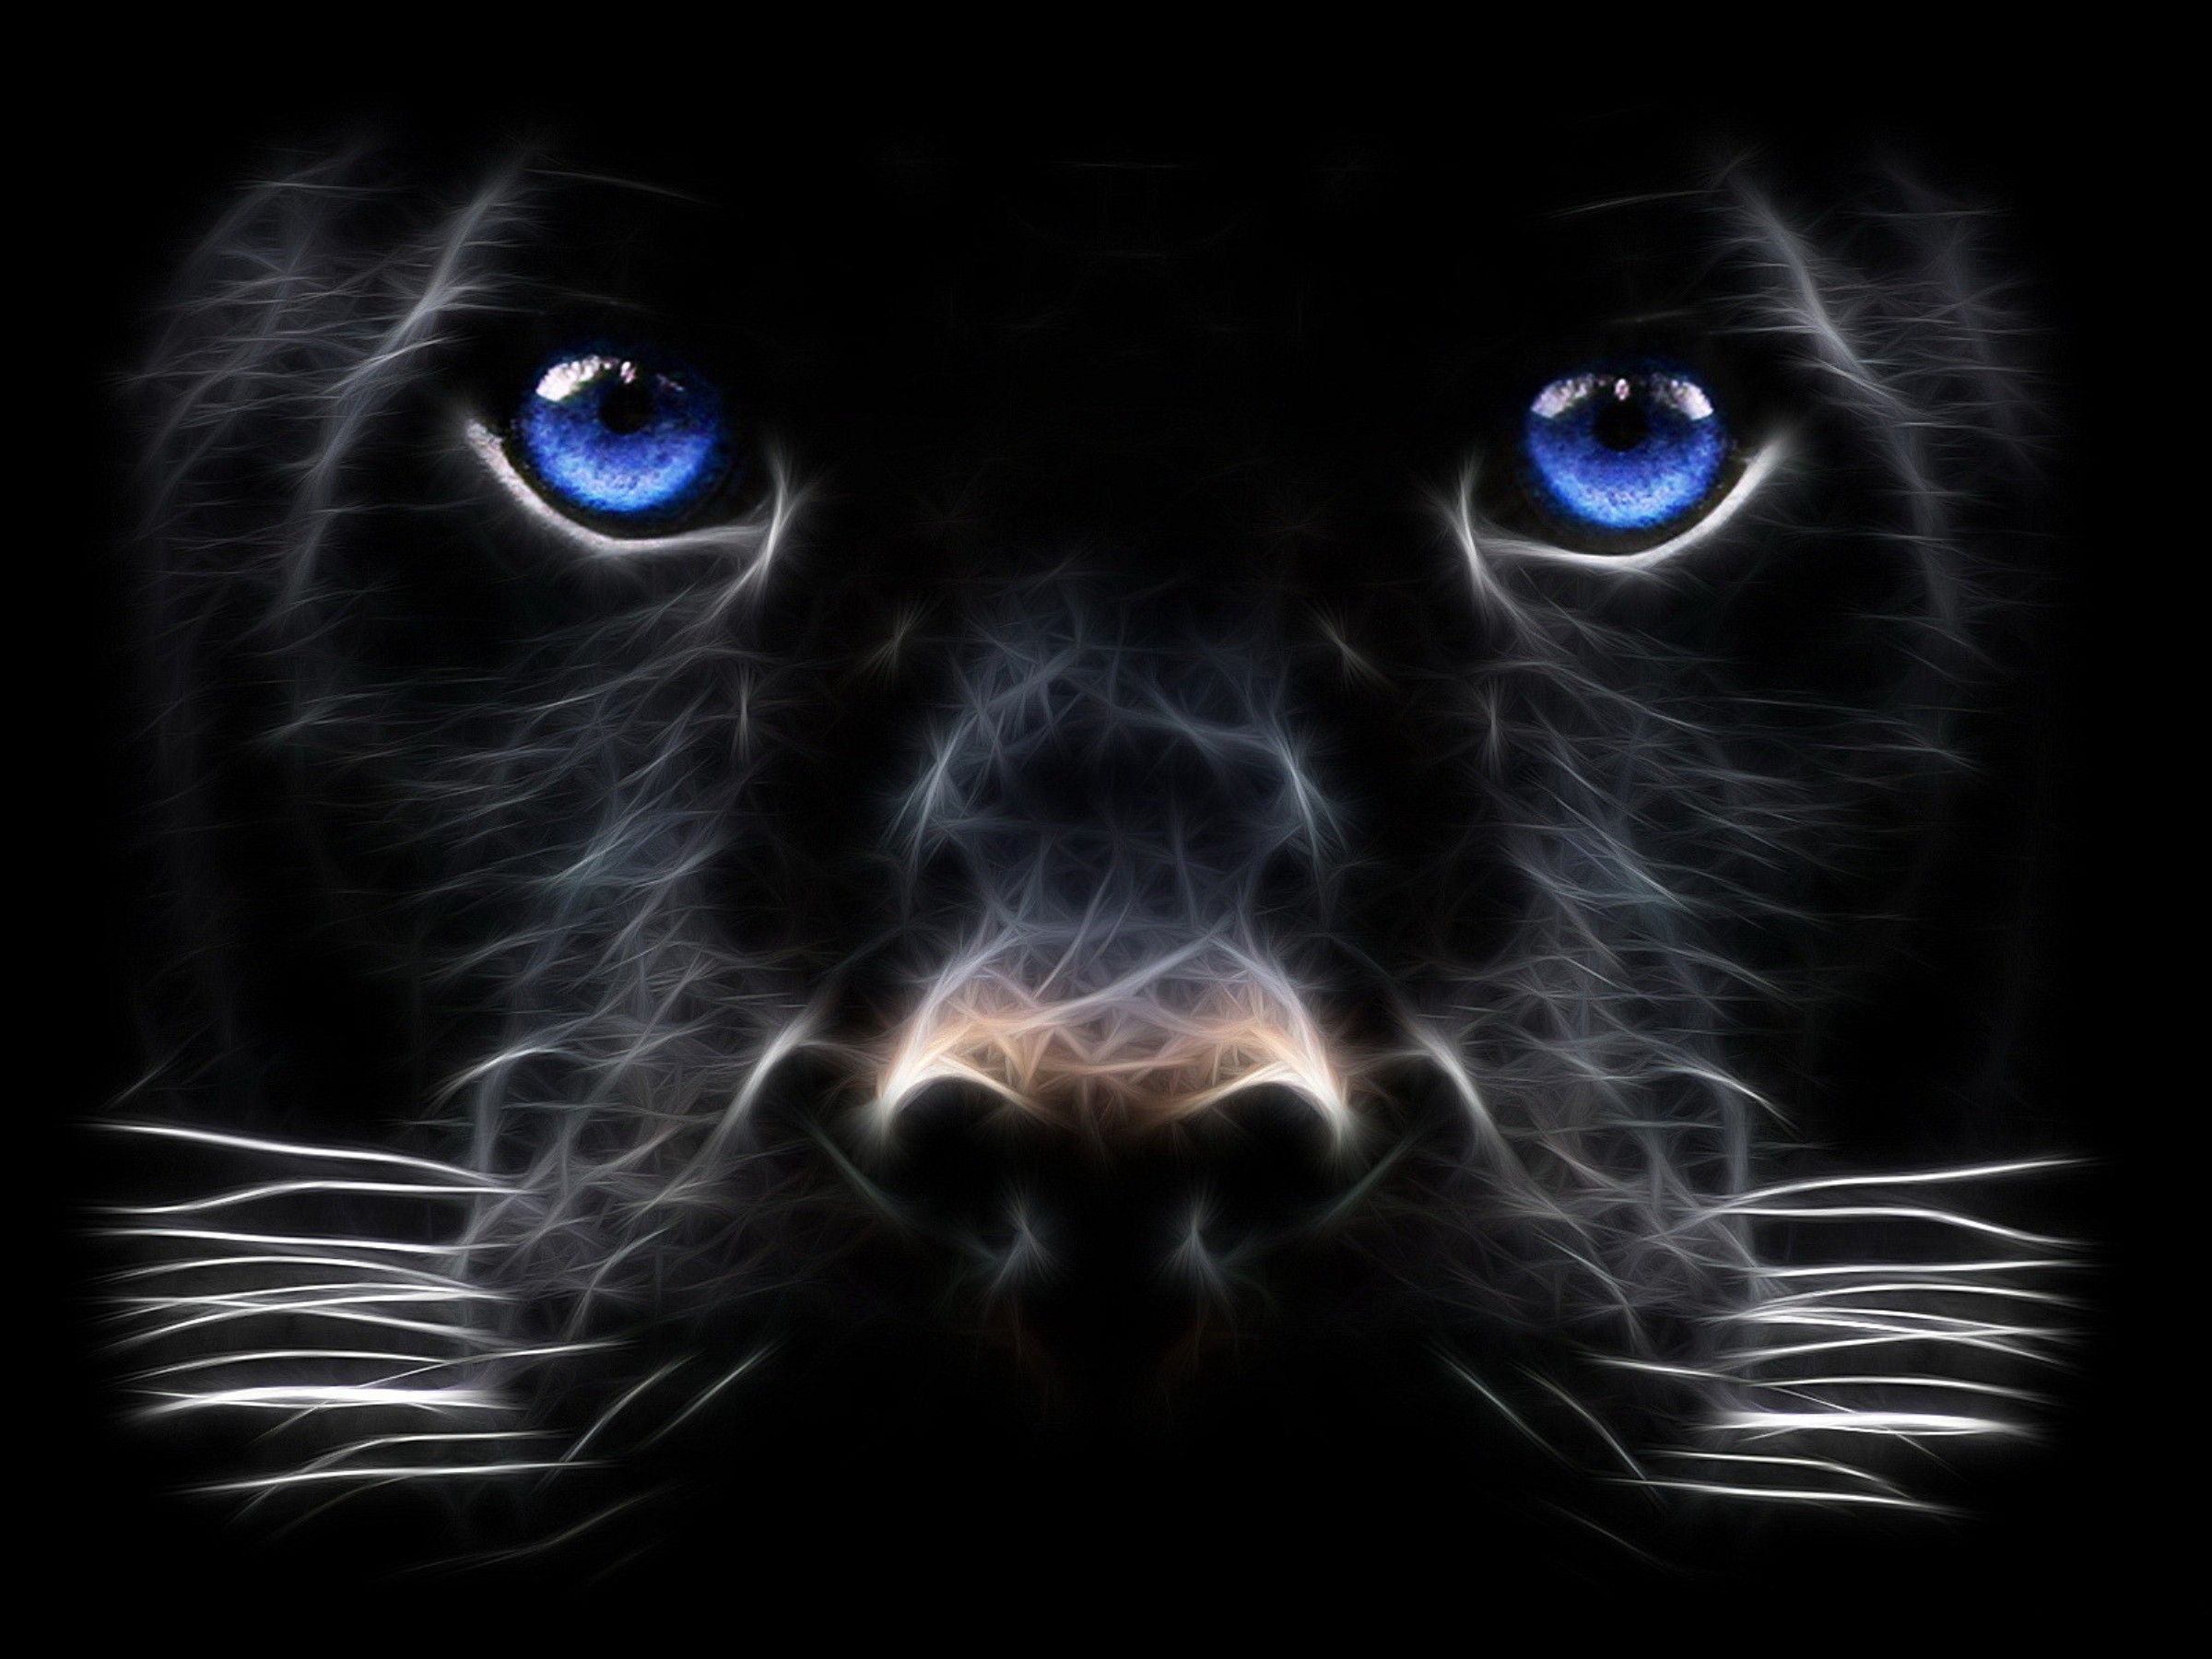 panther Computer Wallpapers, Desktop Backgrounds | 2400x1800 | ID ...